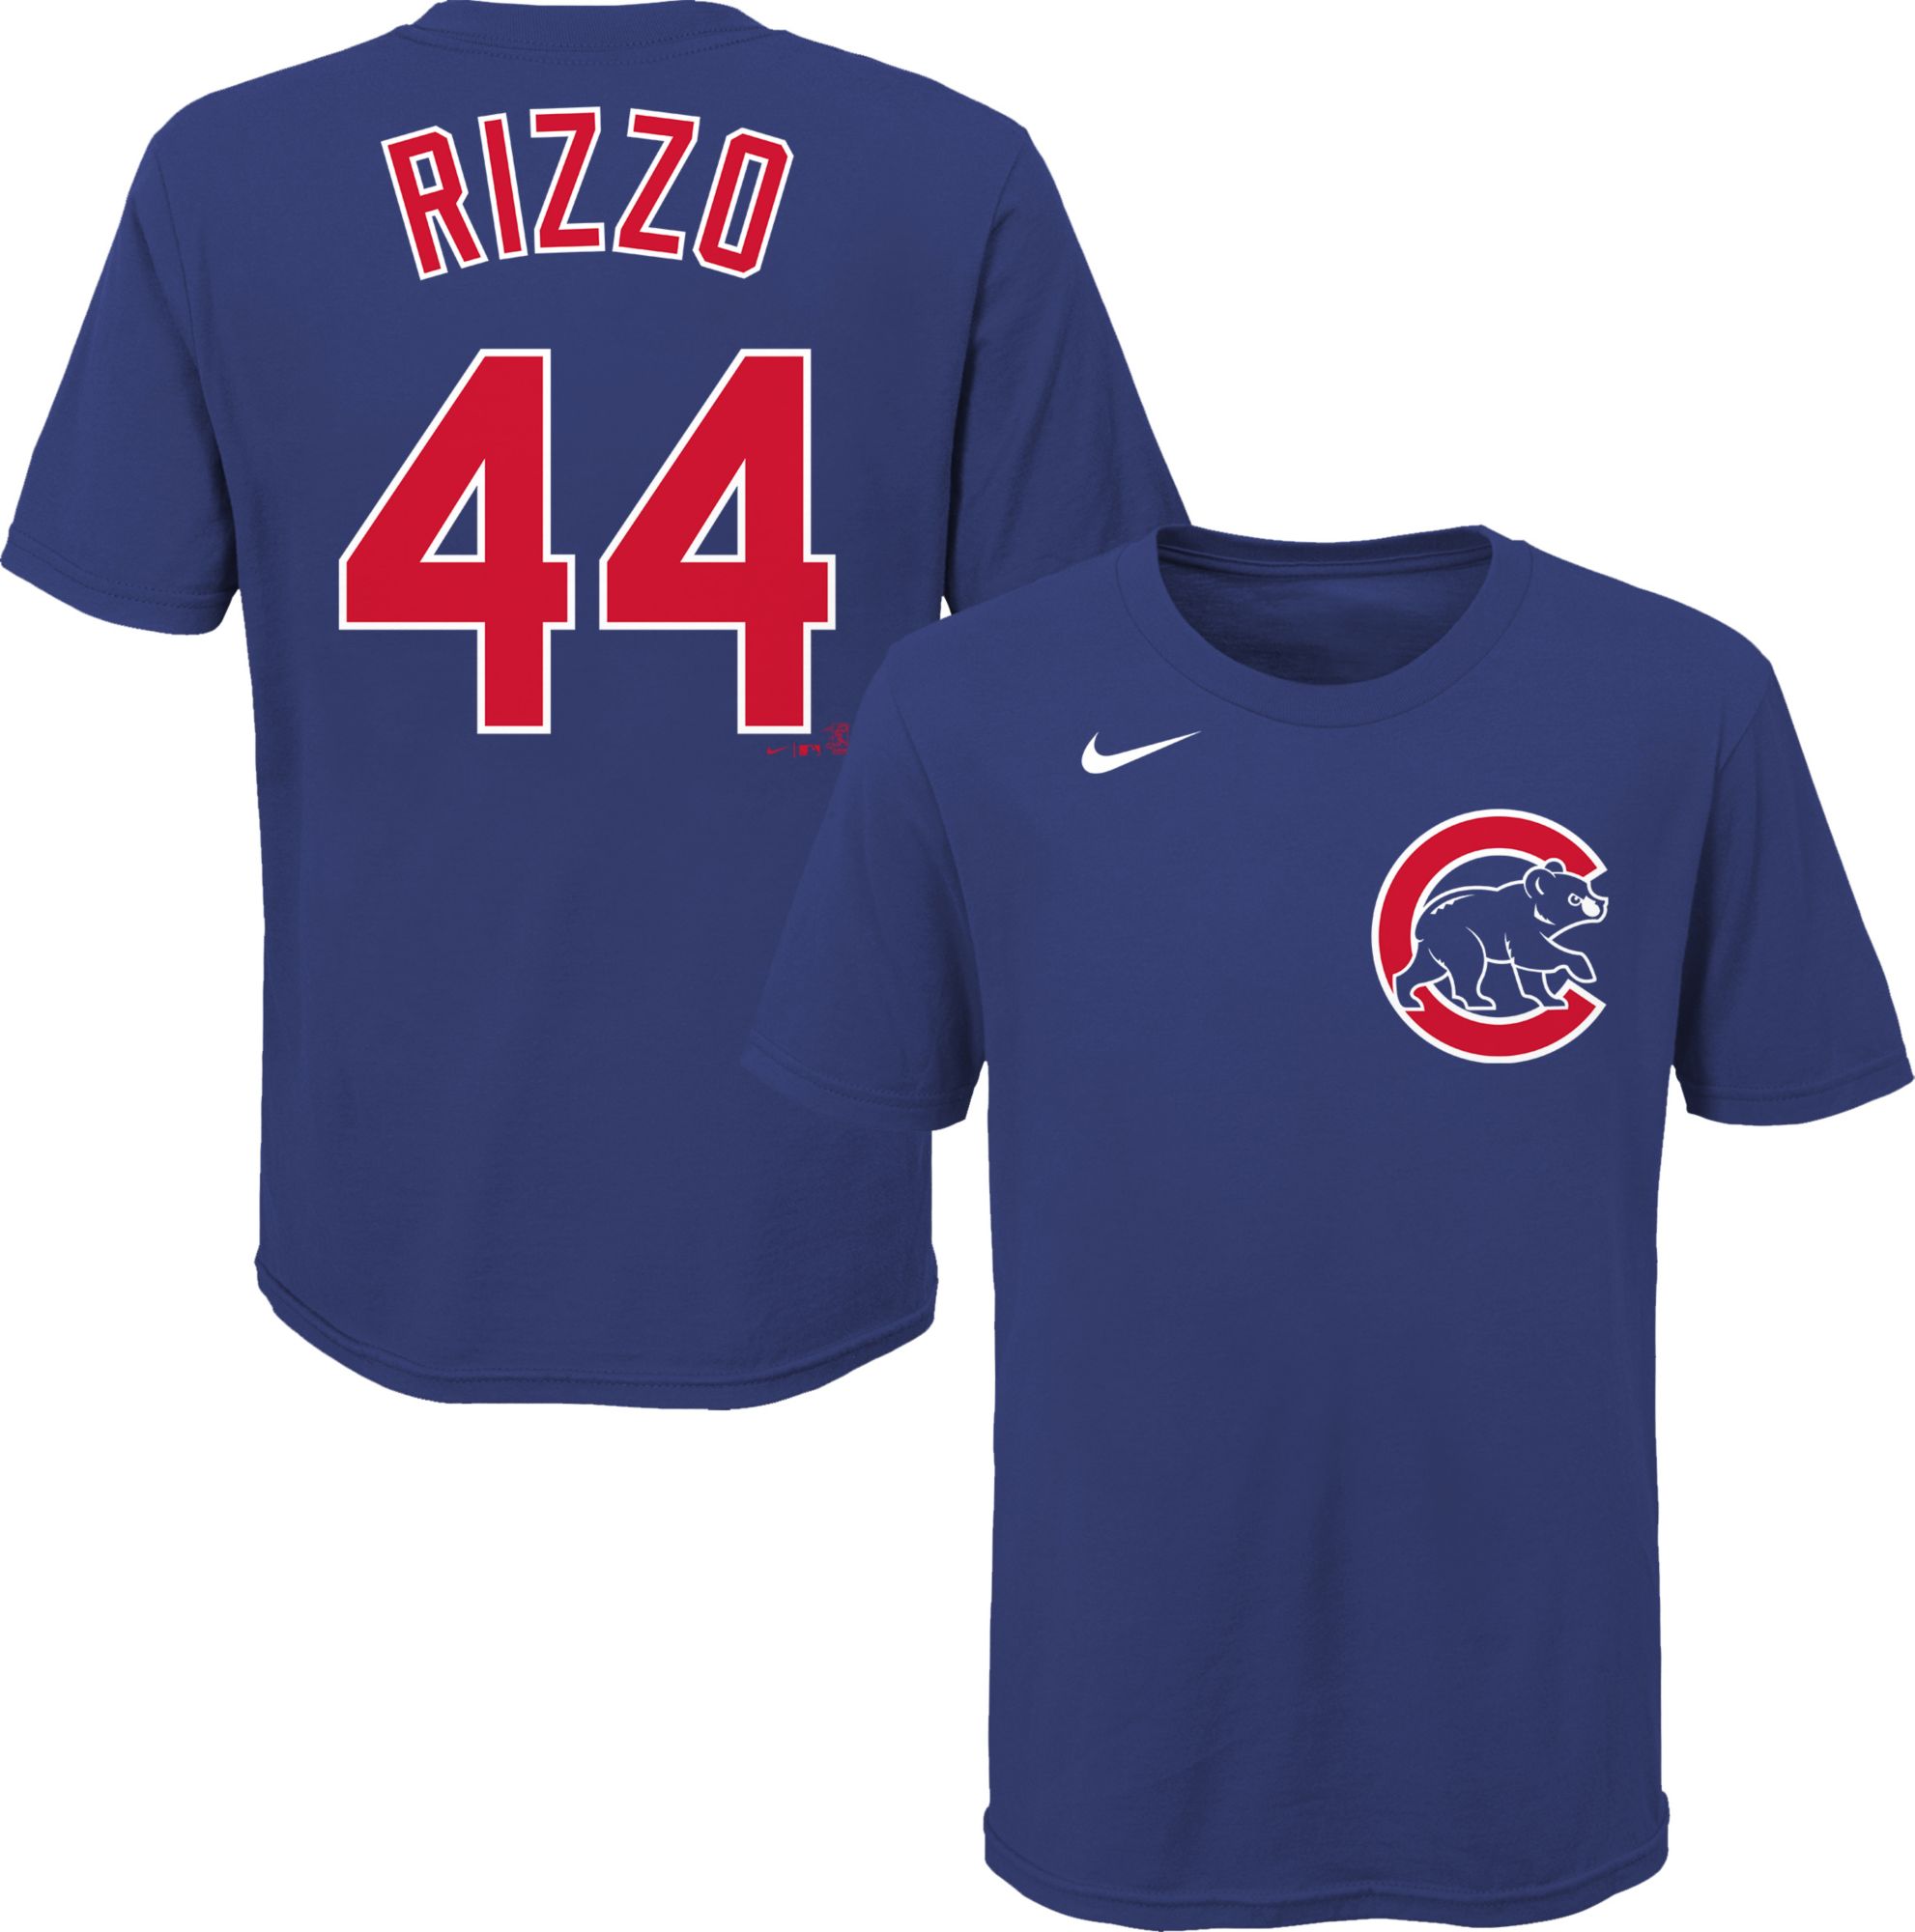 rizzo cubs jersey kids